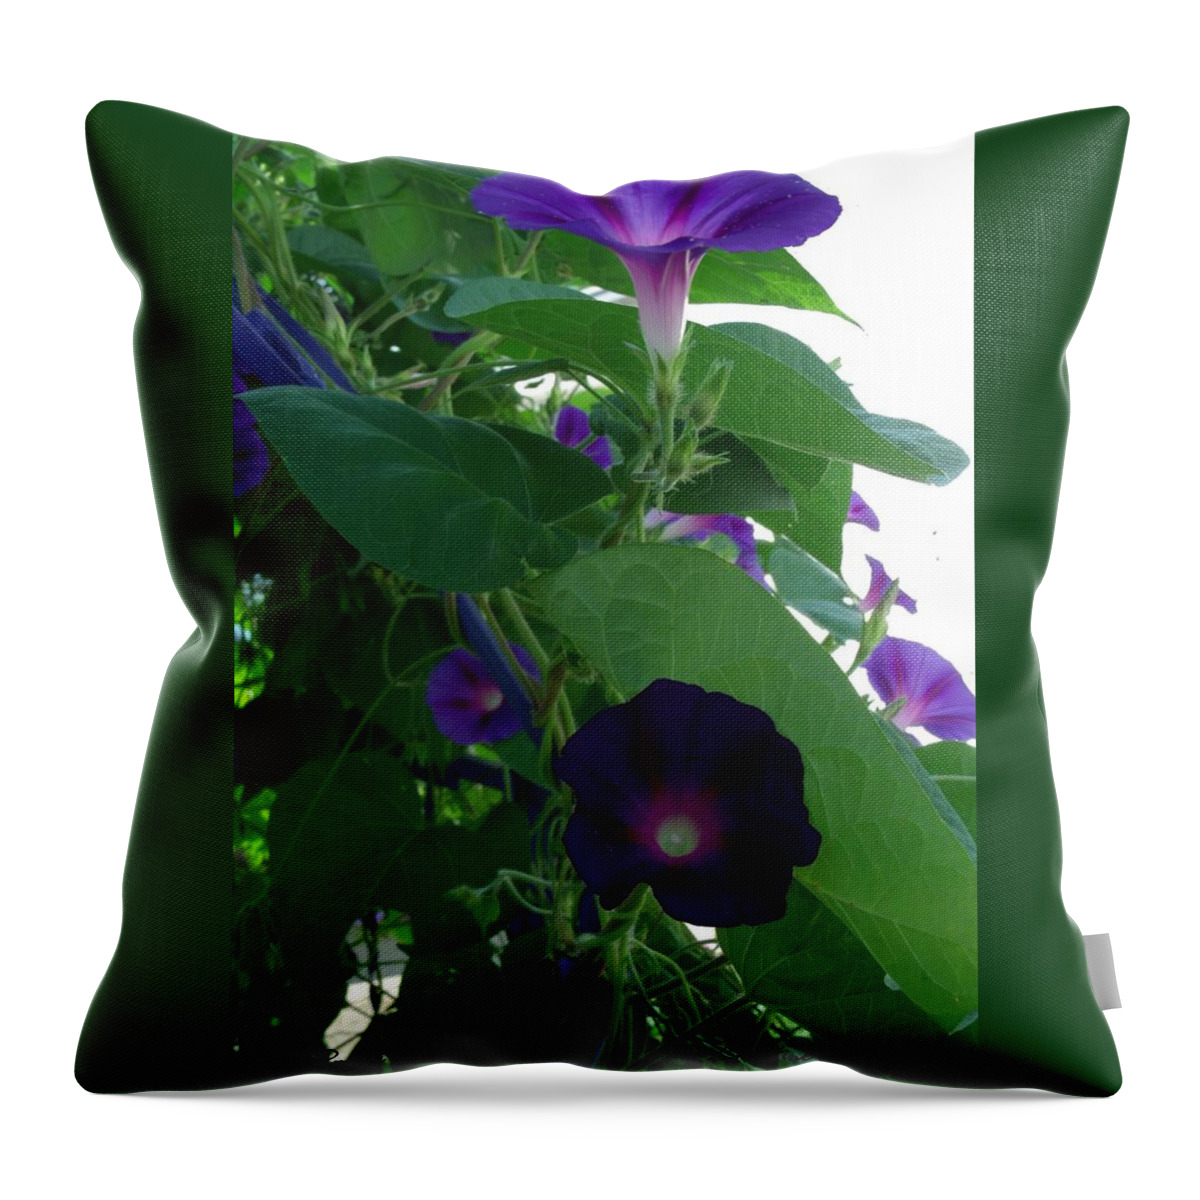 Deep Purple Morning Throw Pillow featuring the photograph Deep Purple Morning by Christine Nichols